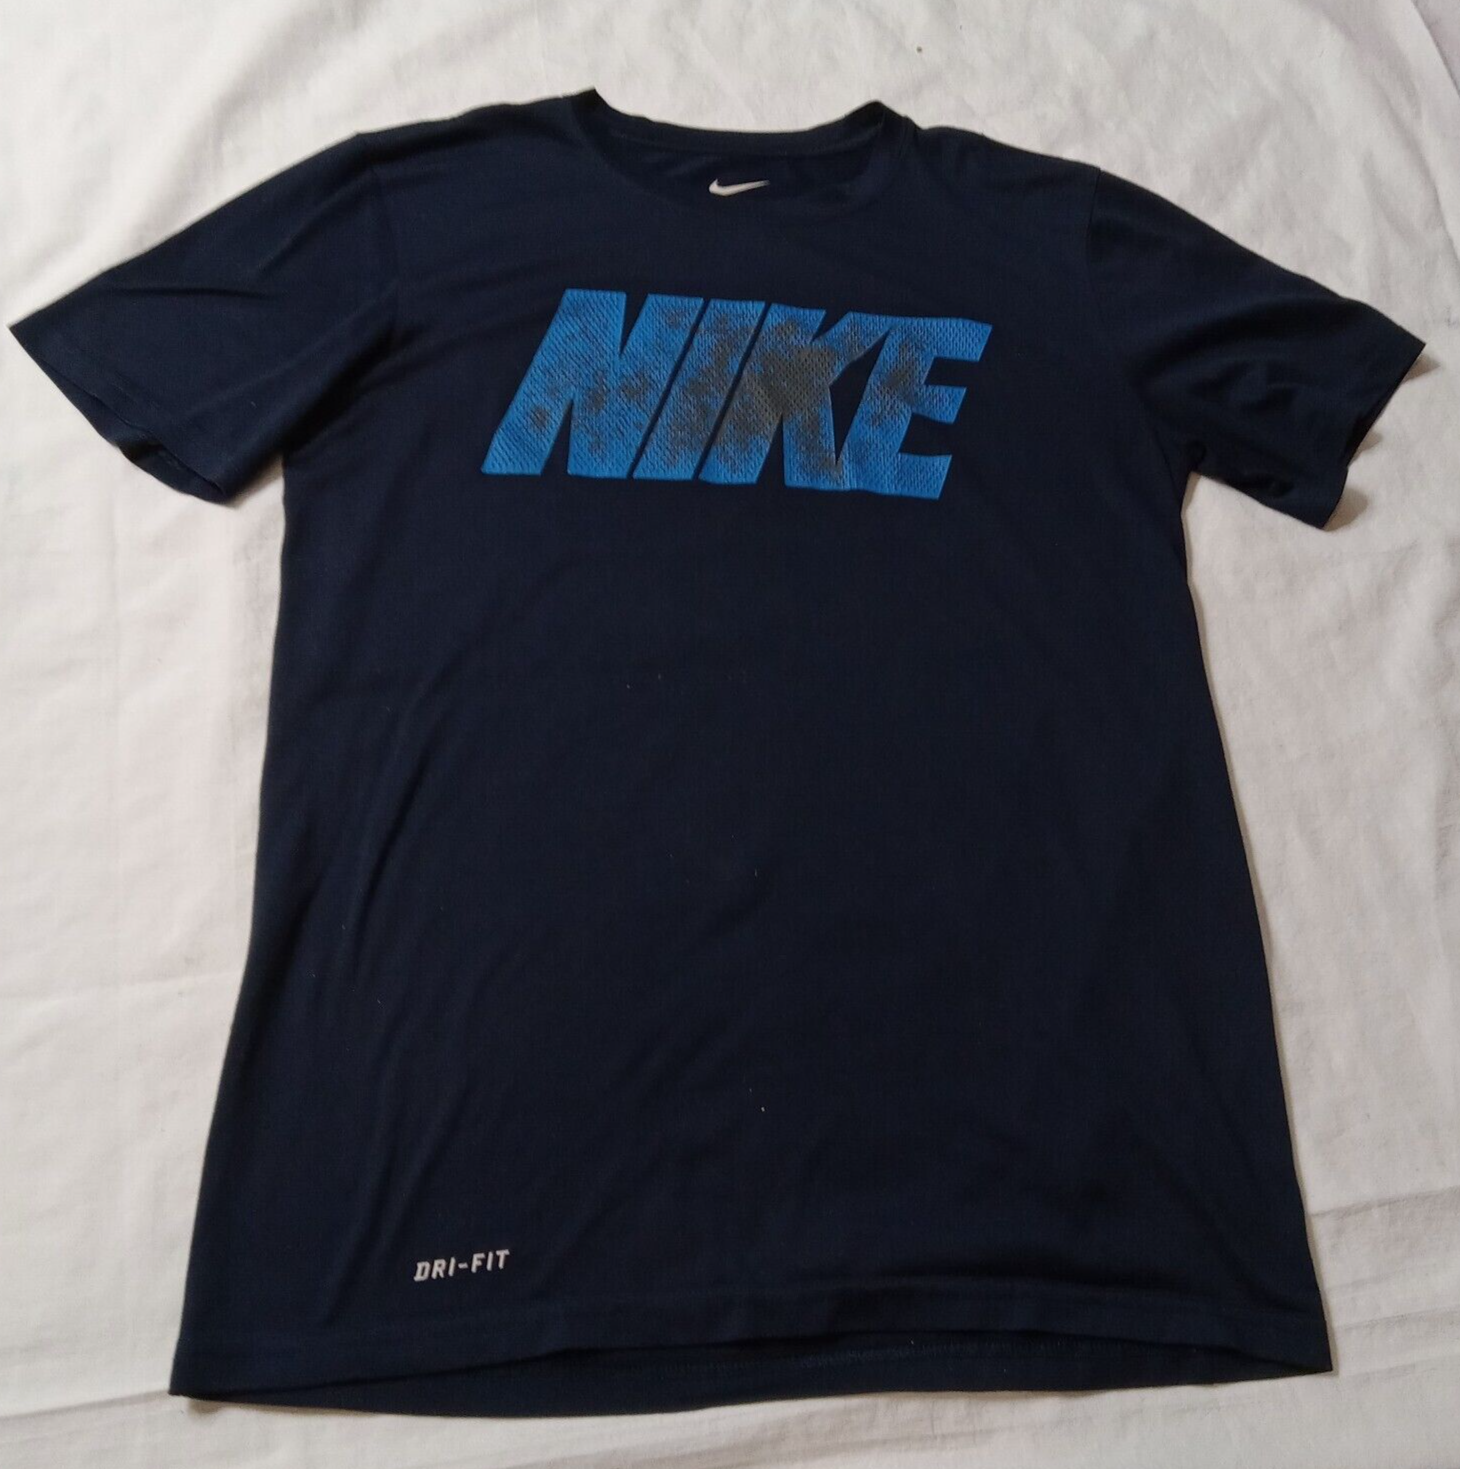 Primary image for Nike Men's Small  Navy Blue  Logo Short Sleeve Cotton Shirt Pinhead-Sized Hole